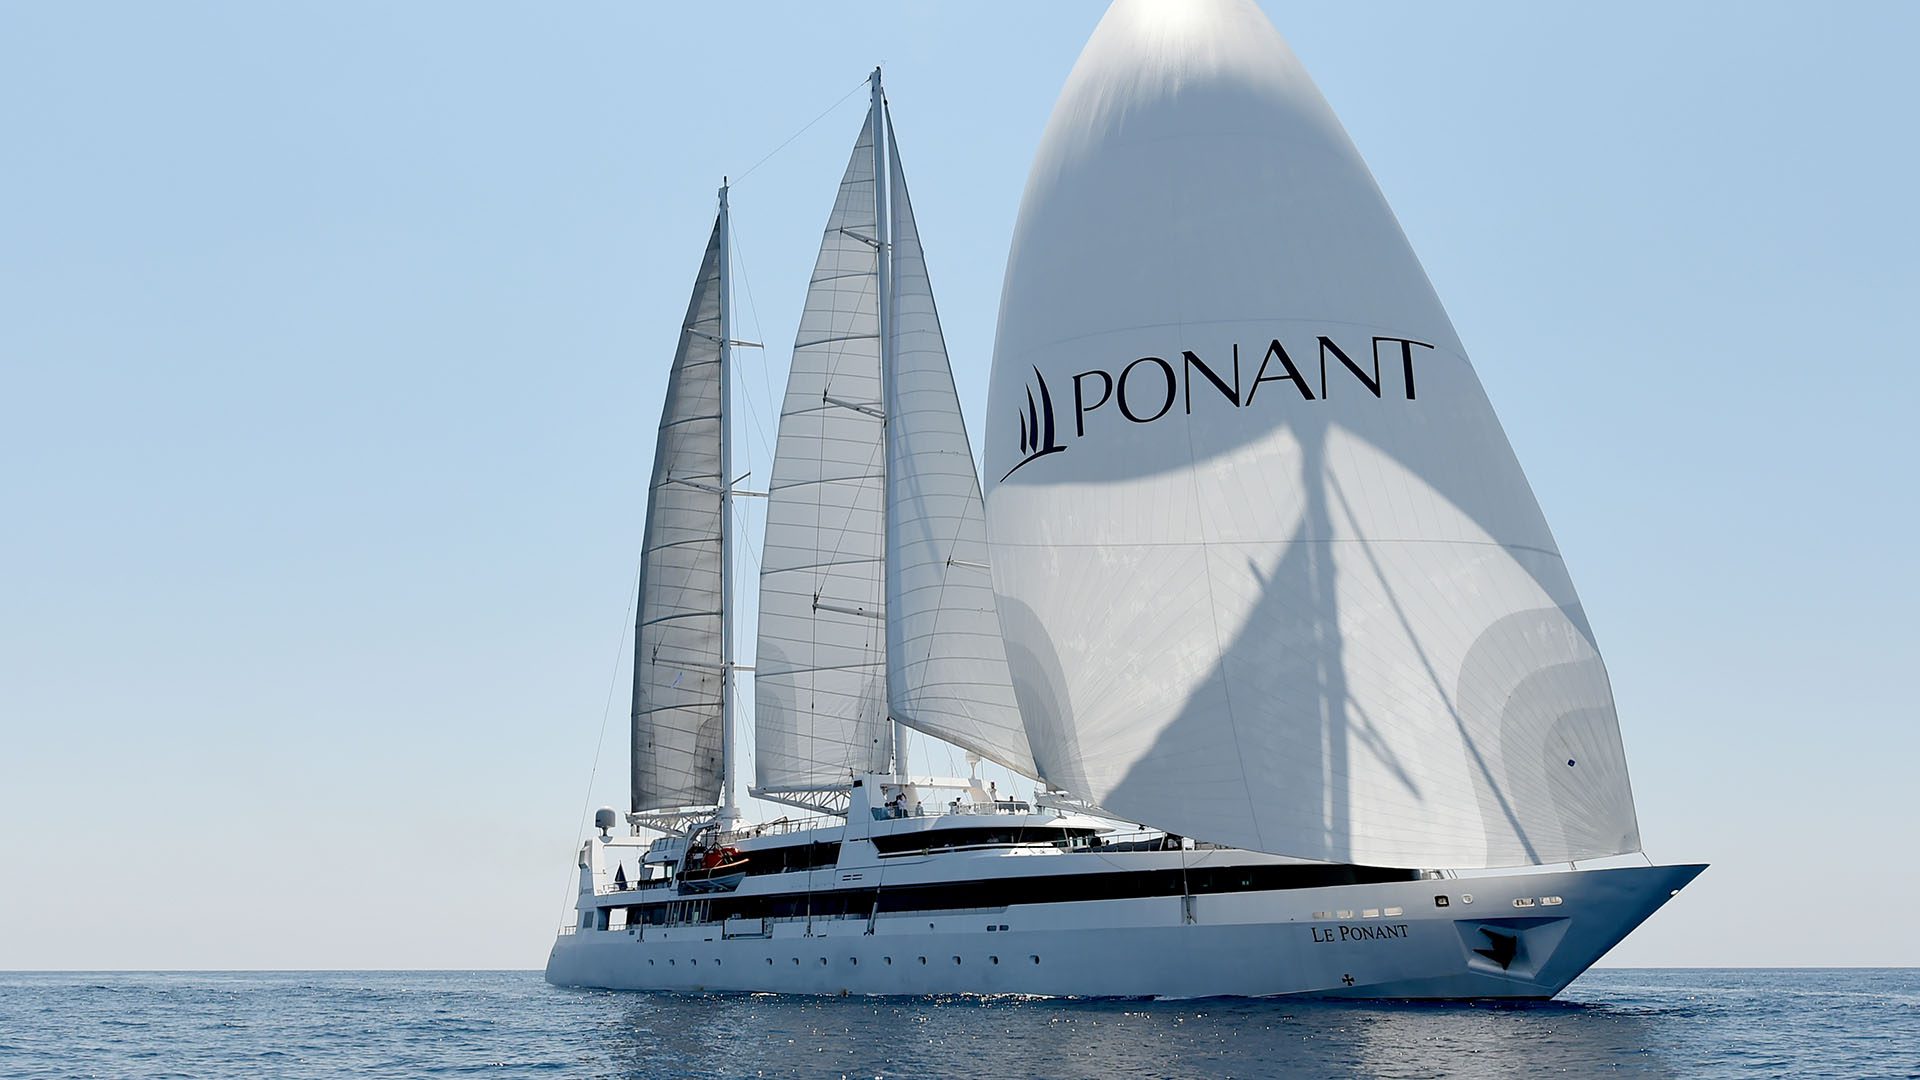 Ponant’s Iconic Sailing Yacht Le Ponant’s Luxurious Kimberley Expeditions